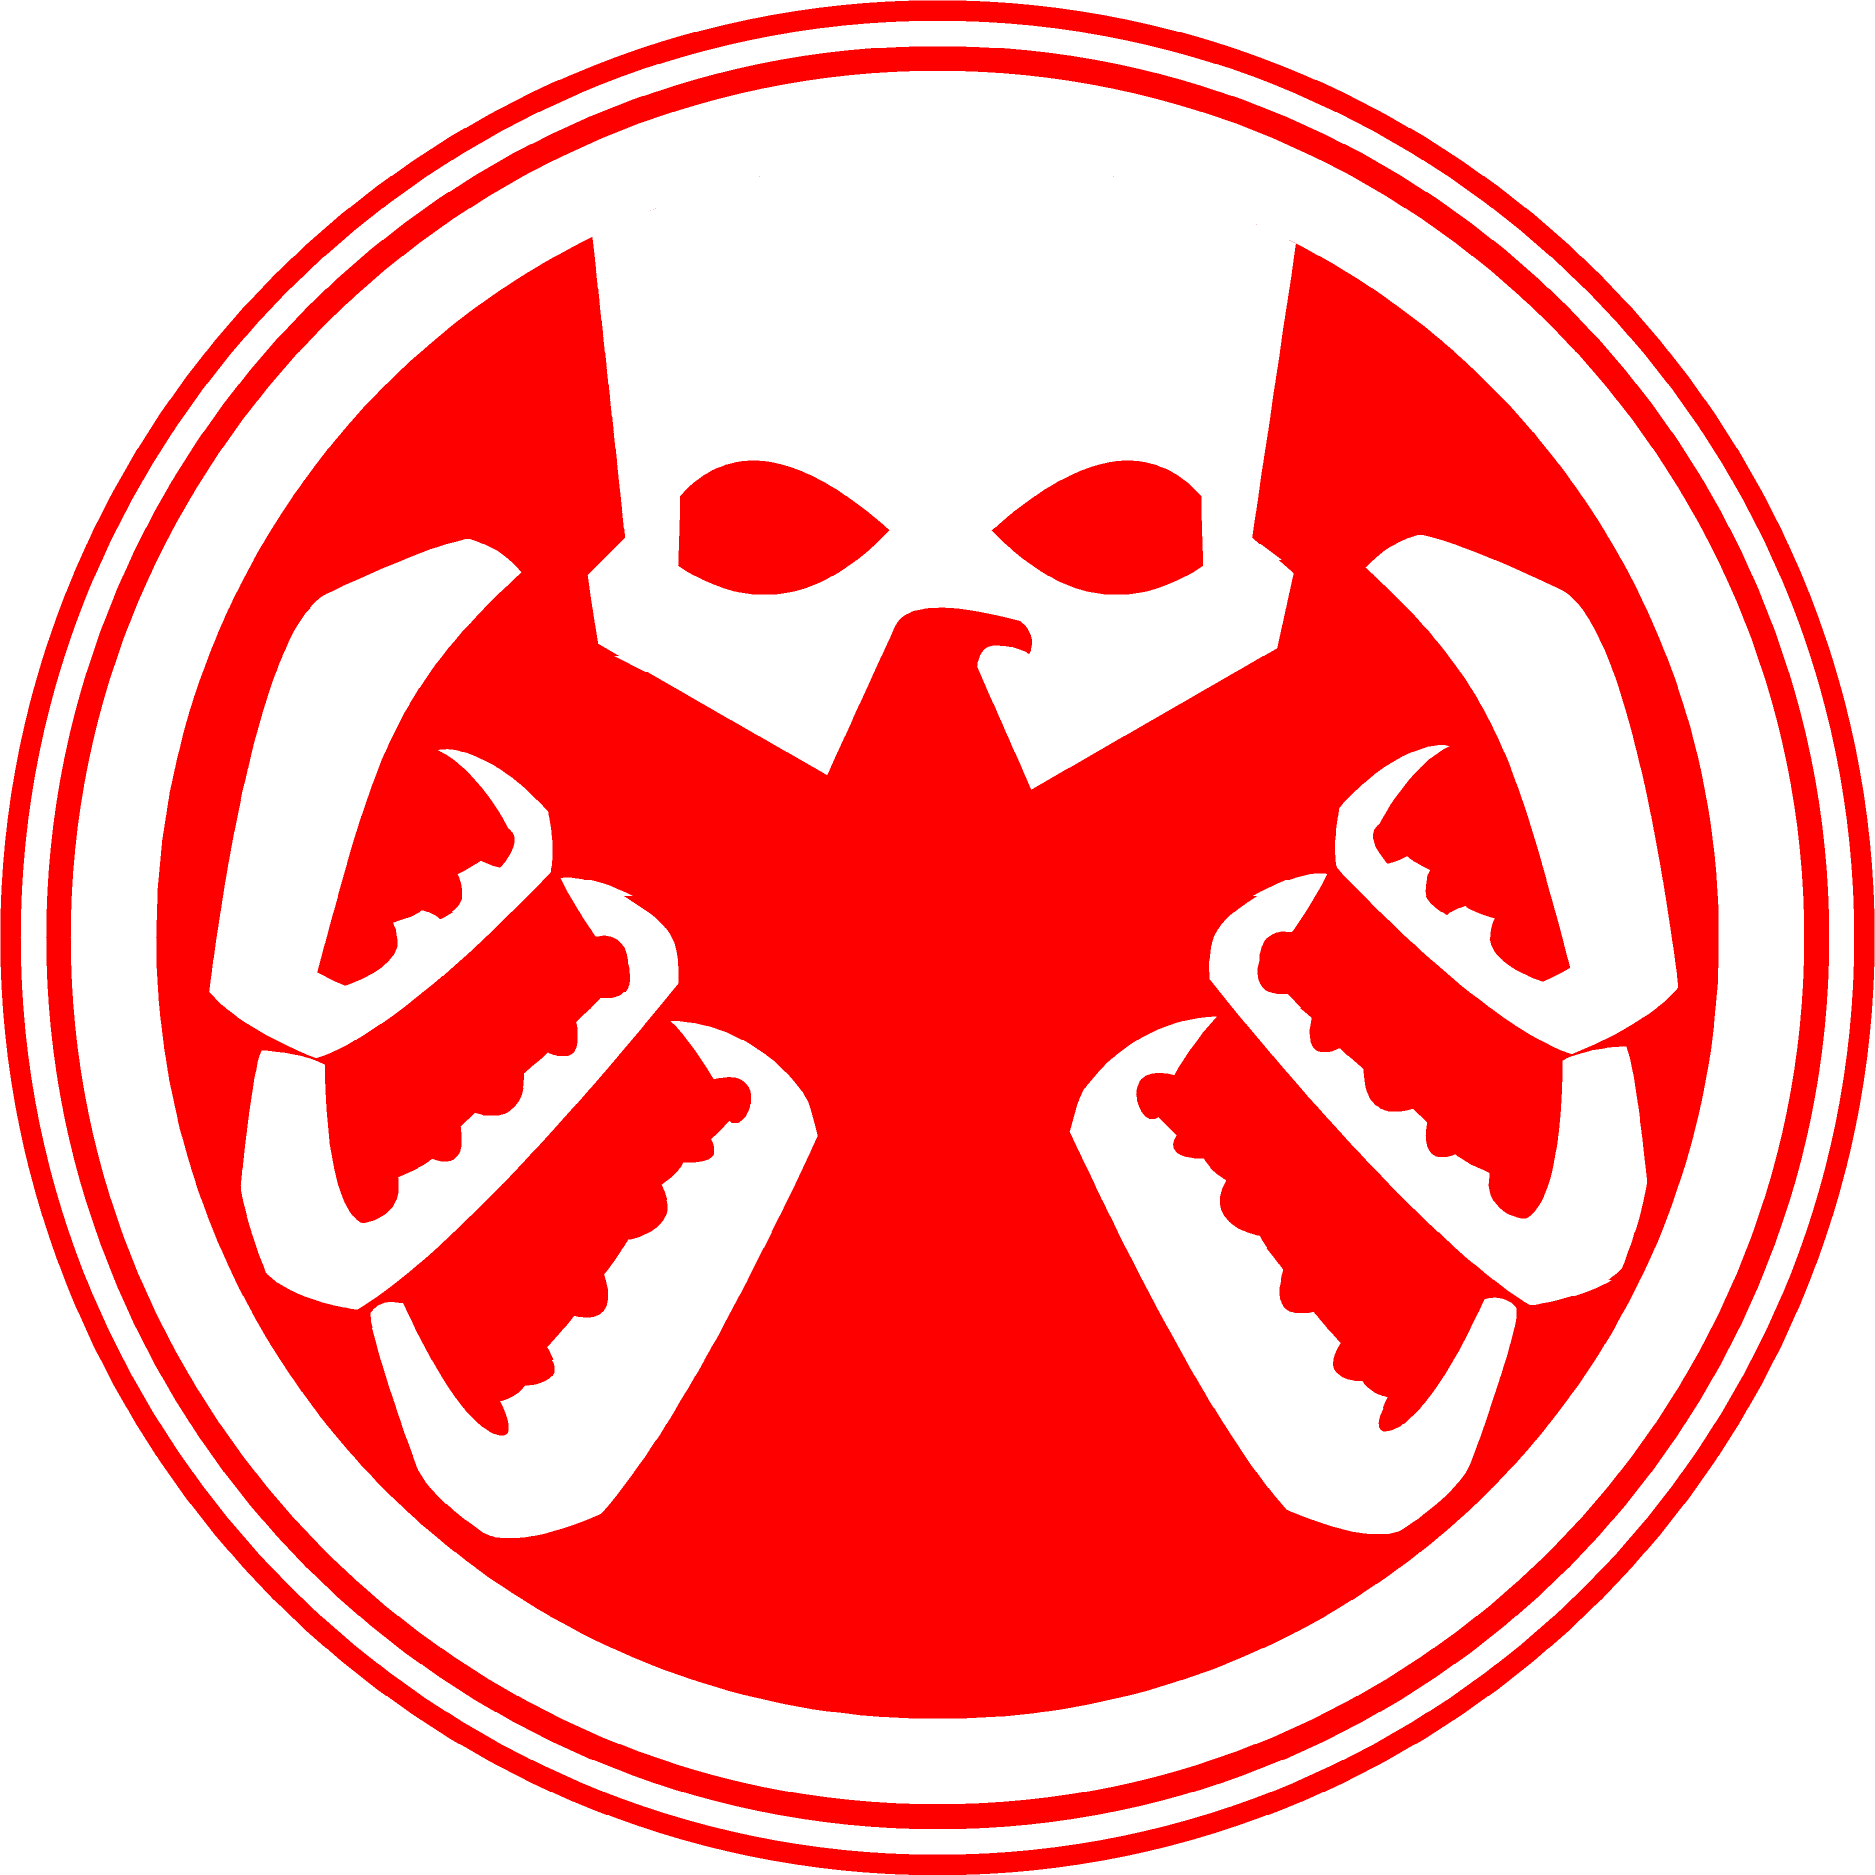 Hydra Logo - A Quick Trace Of The SHIELD HYDRA Logo From Paolo Rivera. AGENTS OF